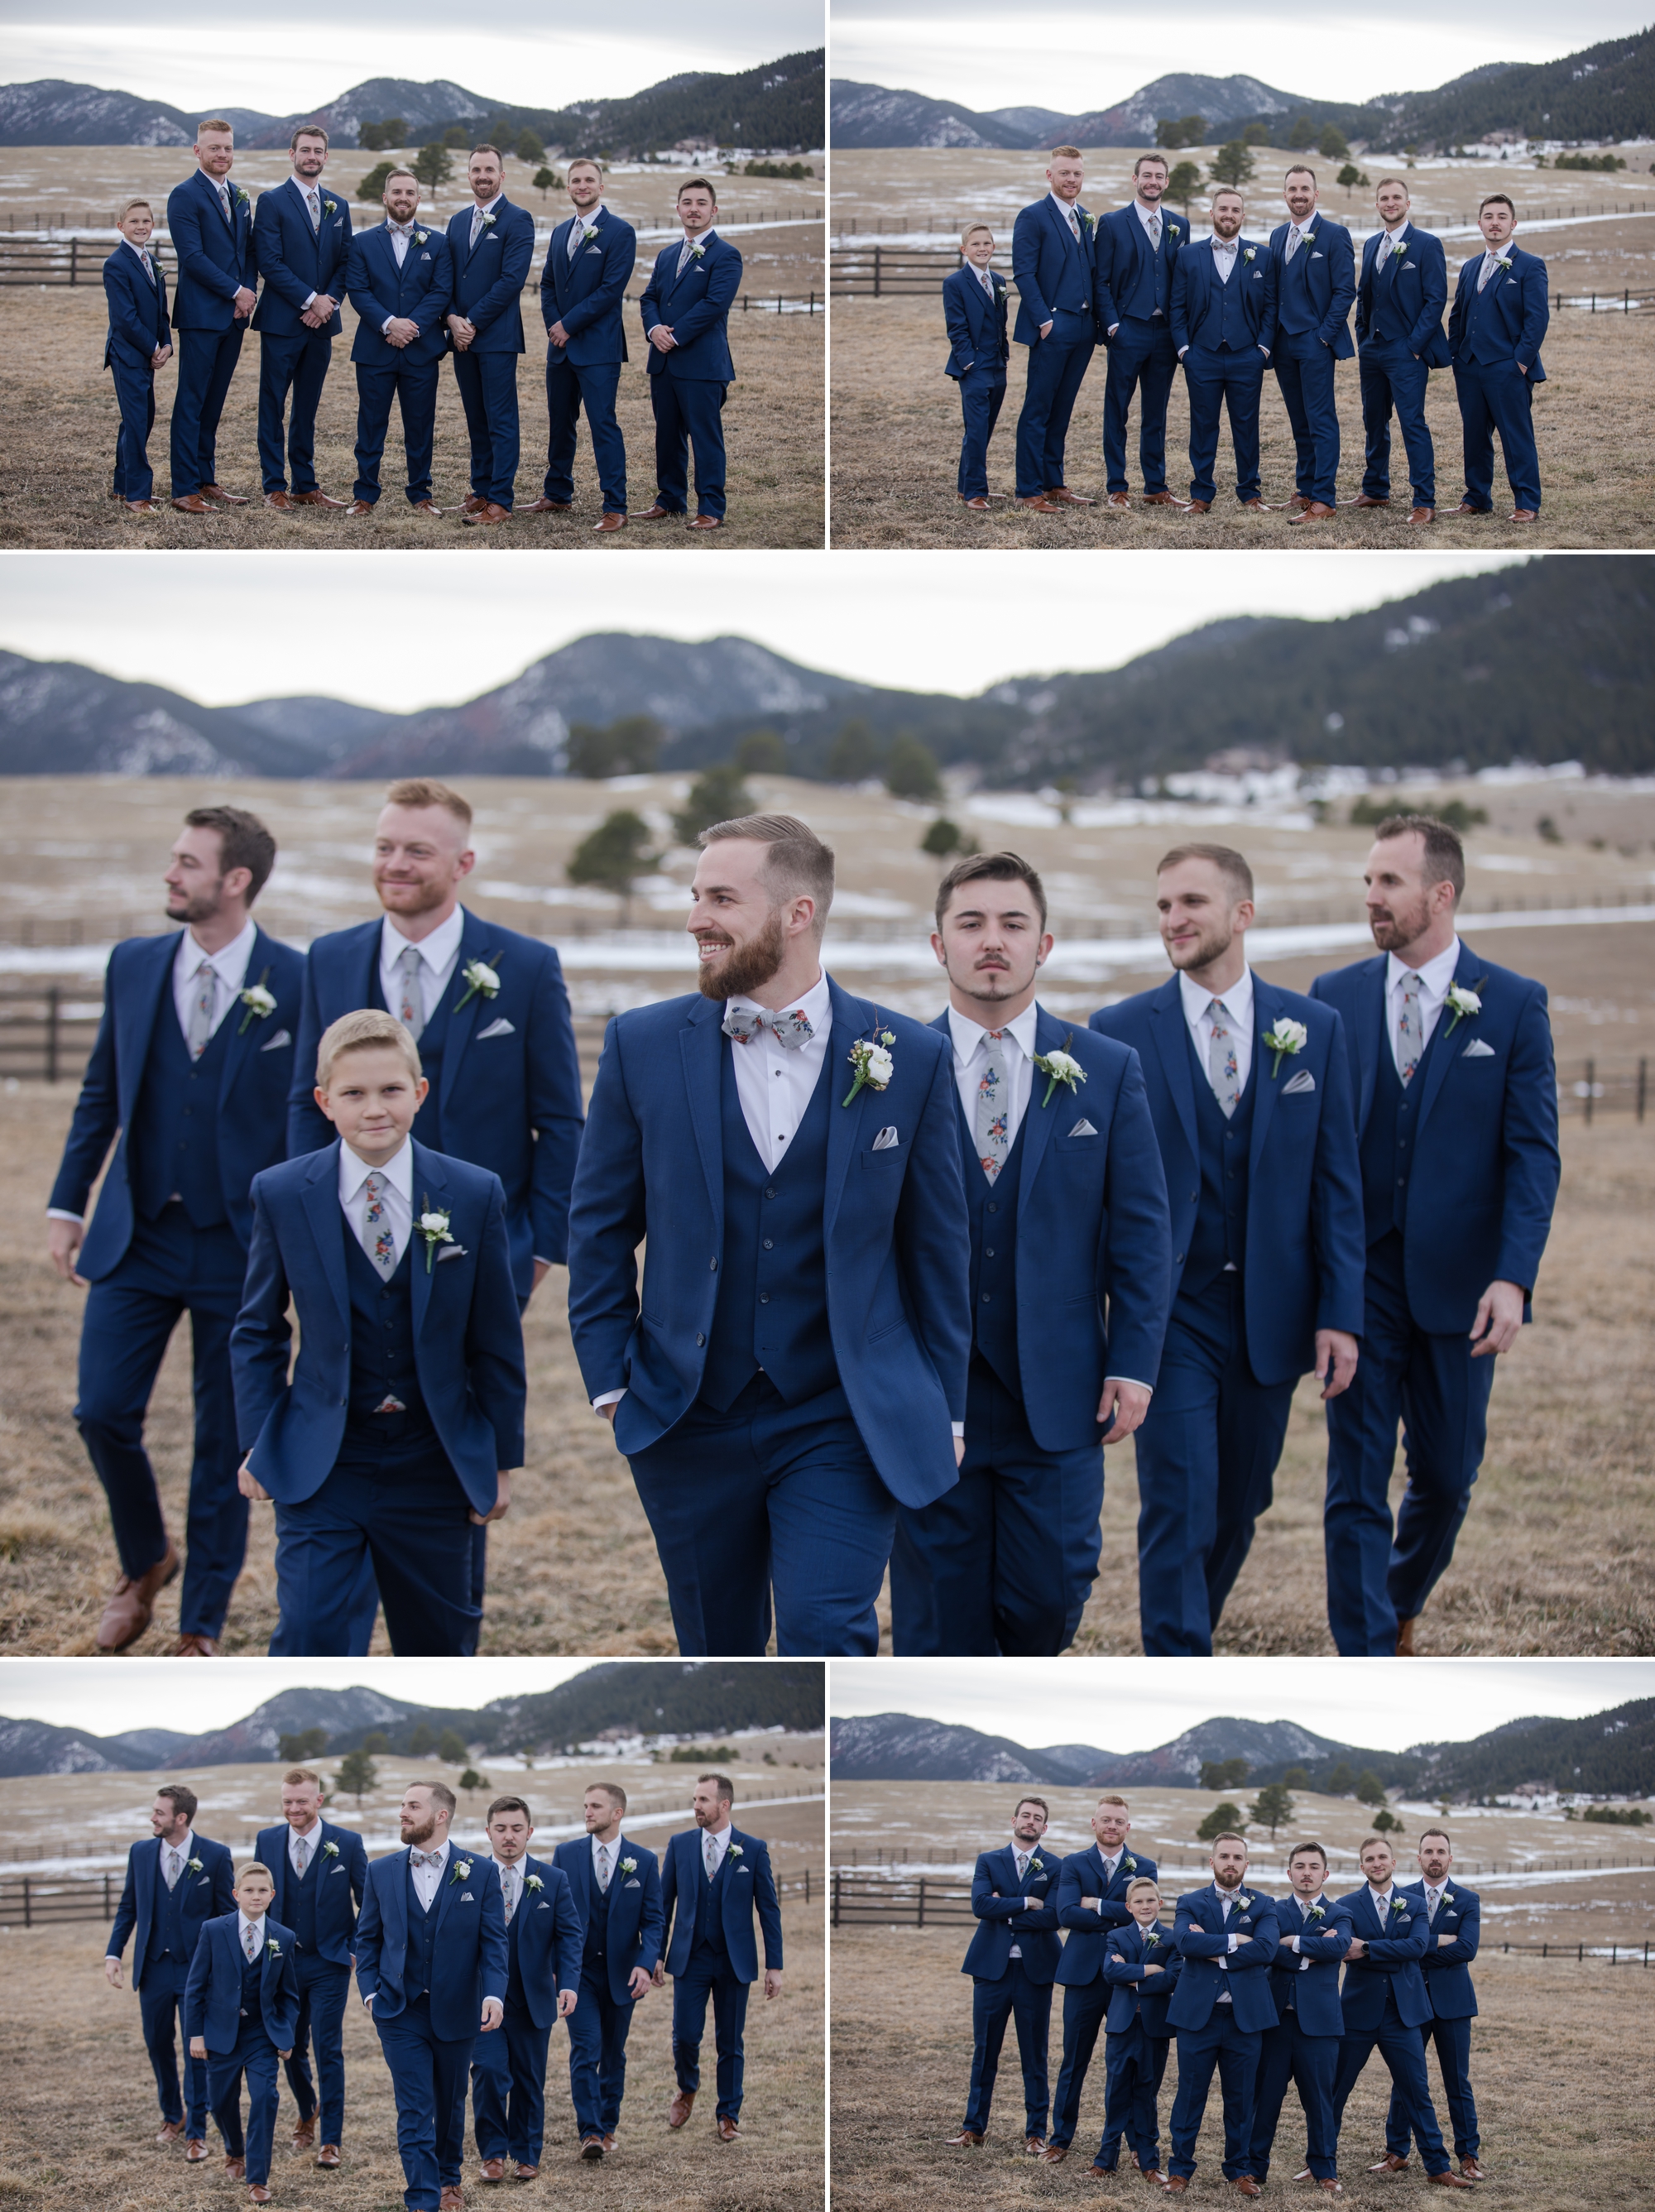 Groom and groomsmen in front of rocky mountains